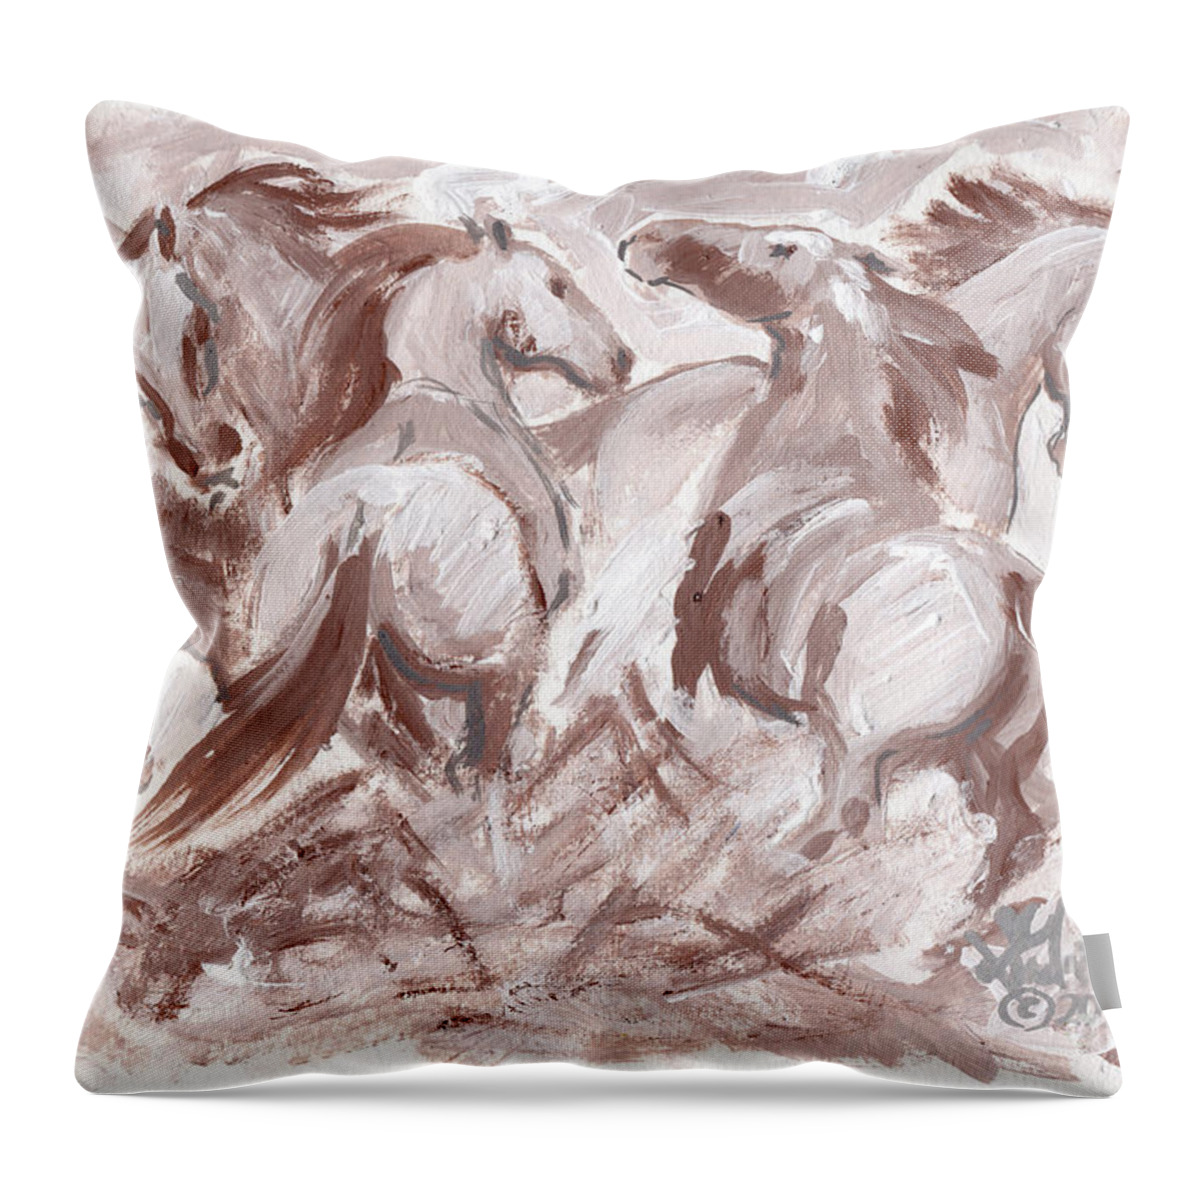 Stallions Throw Pillow featuring the painting Frenzy by Linda L Martin